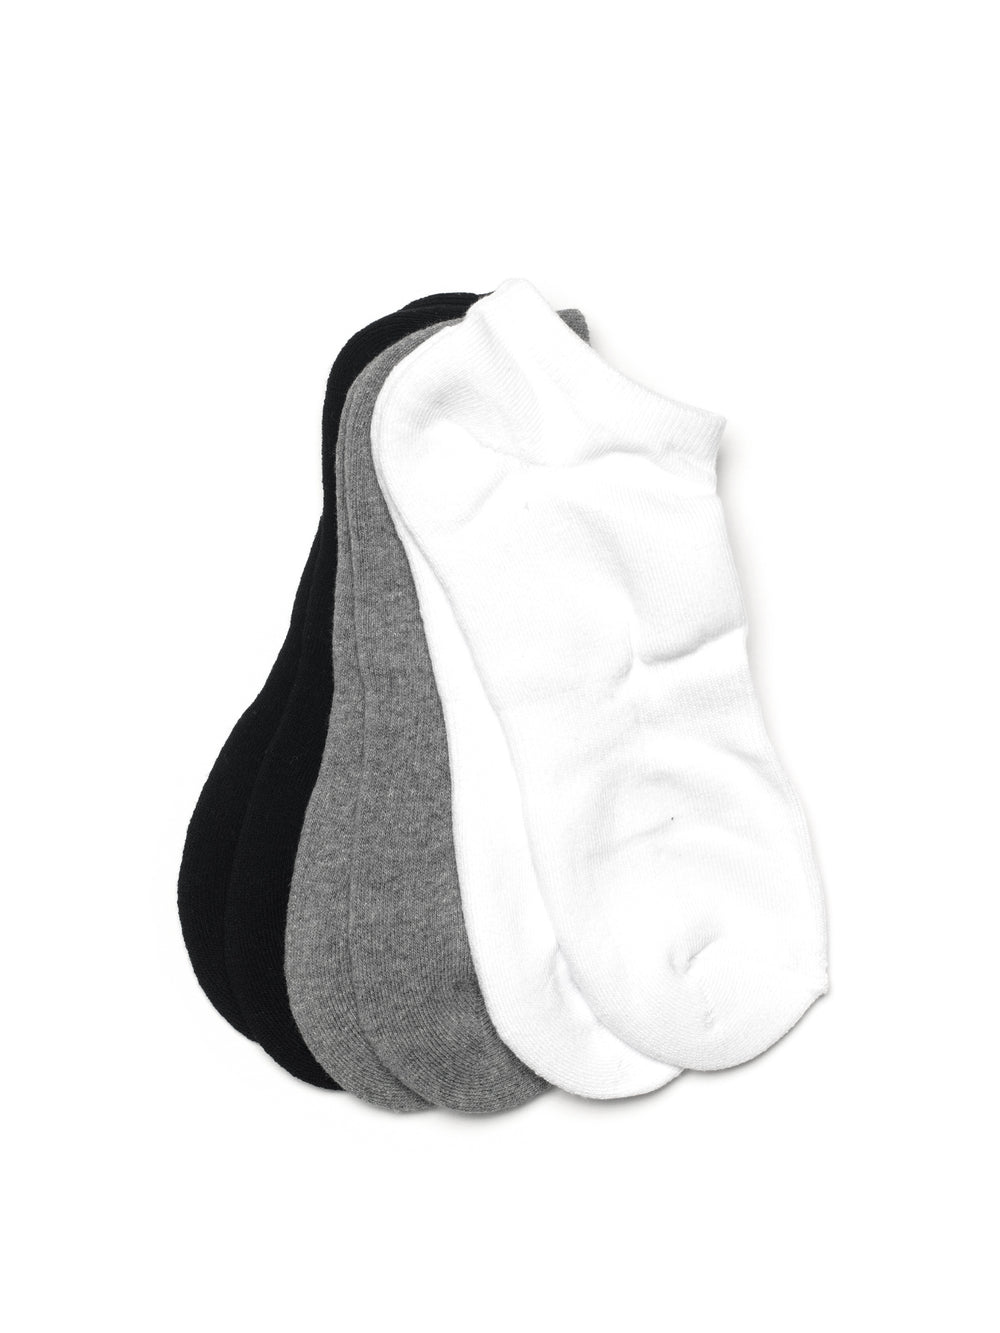 SCOUT & TRAIL ANKLE 3 PACK SOCKS